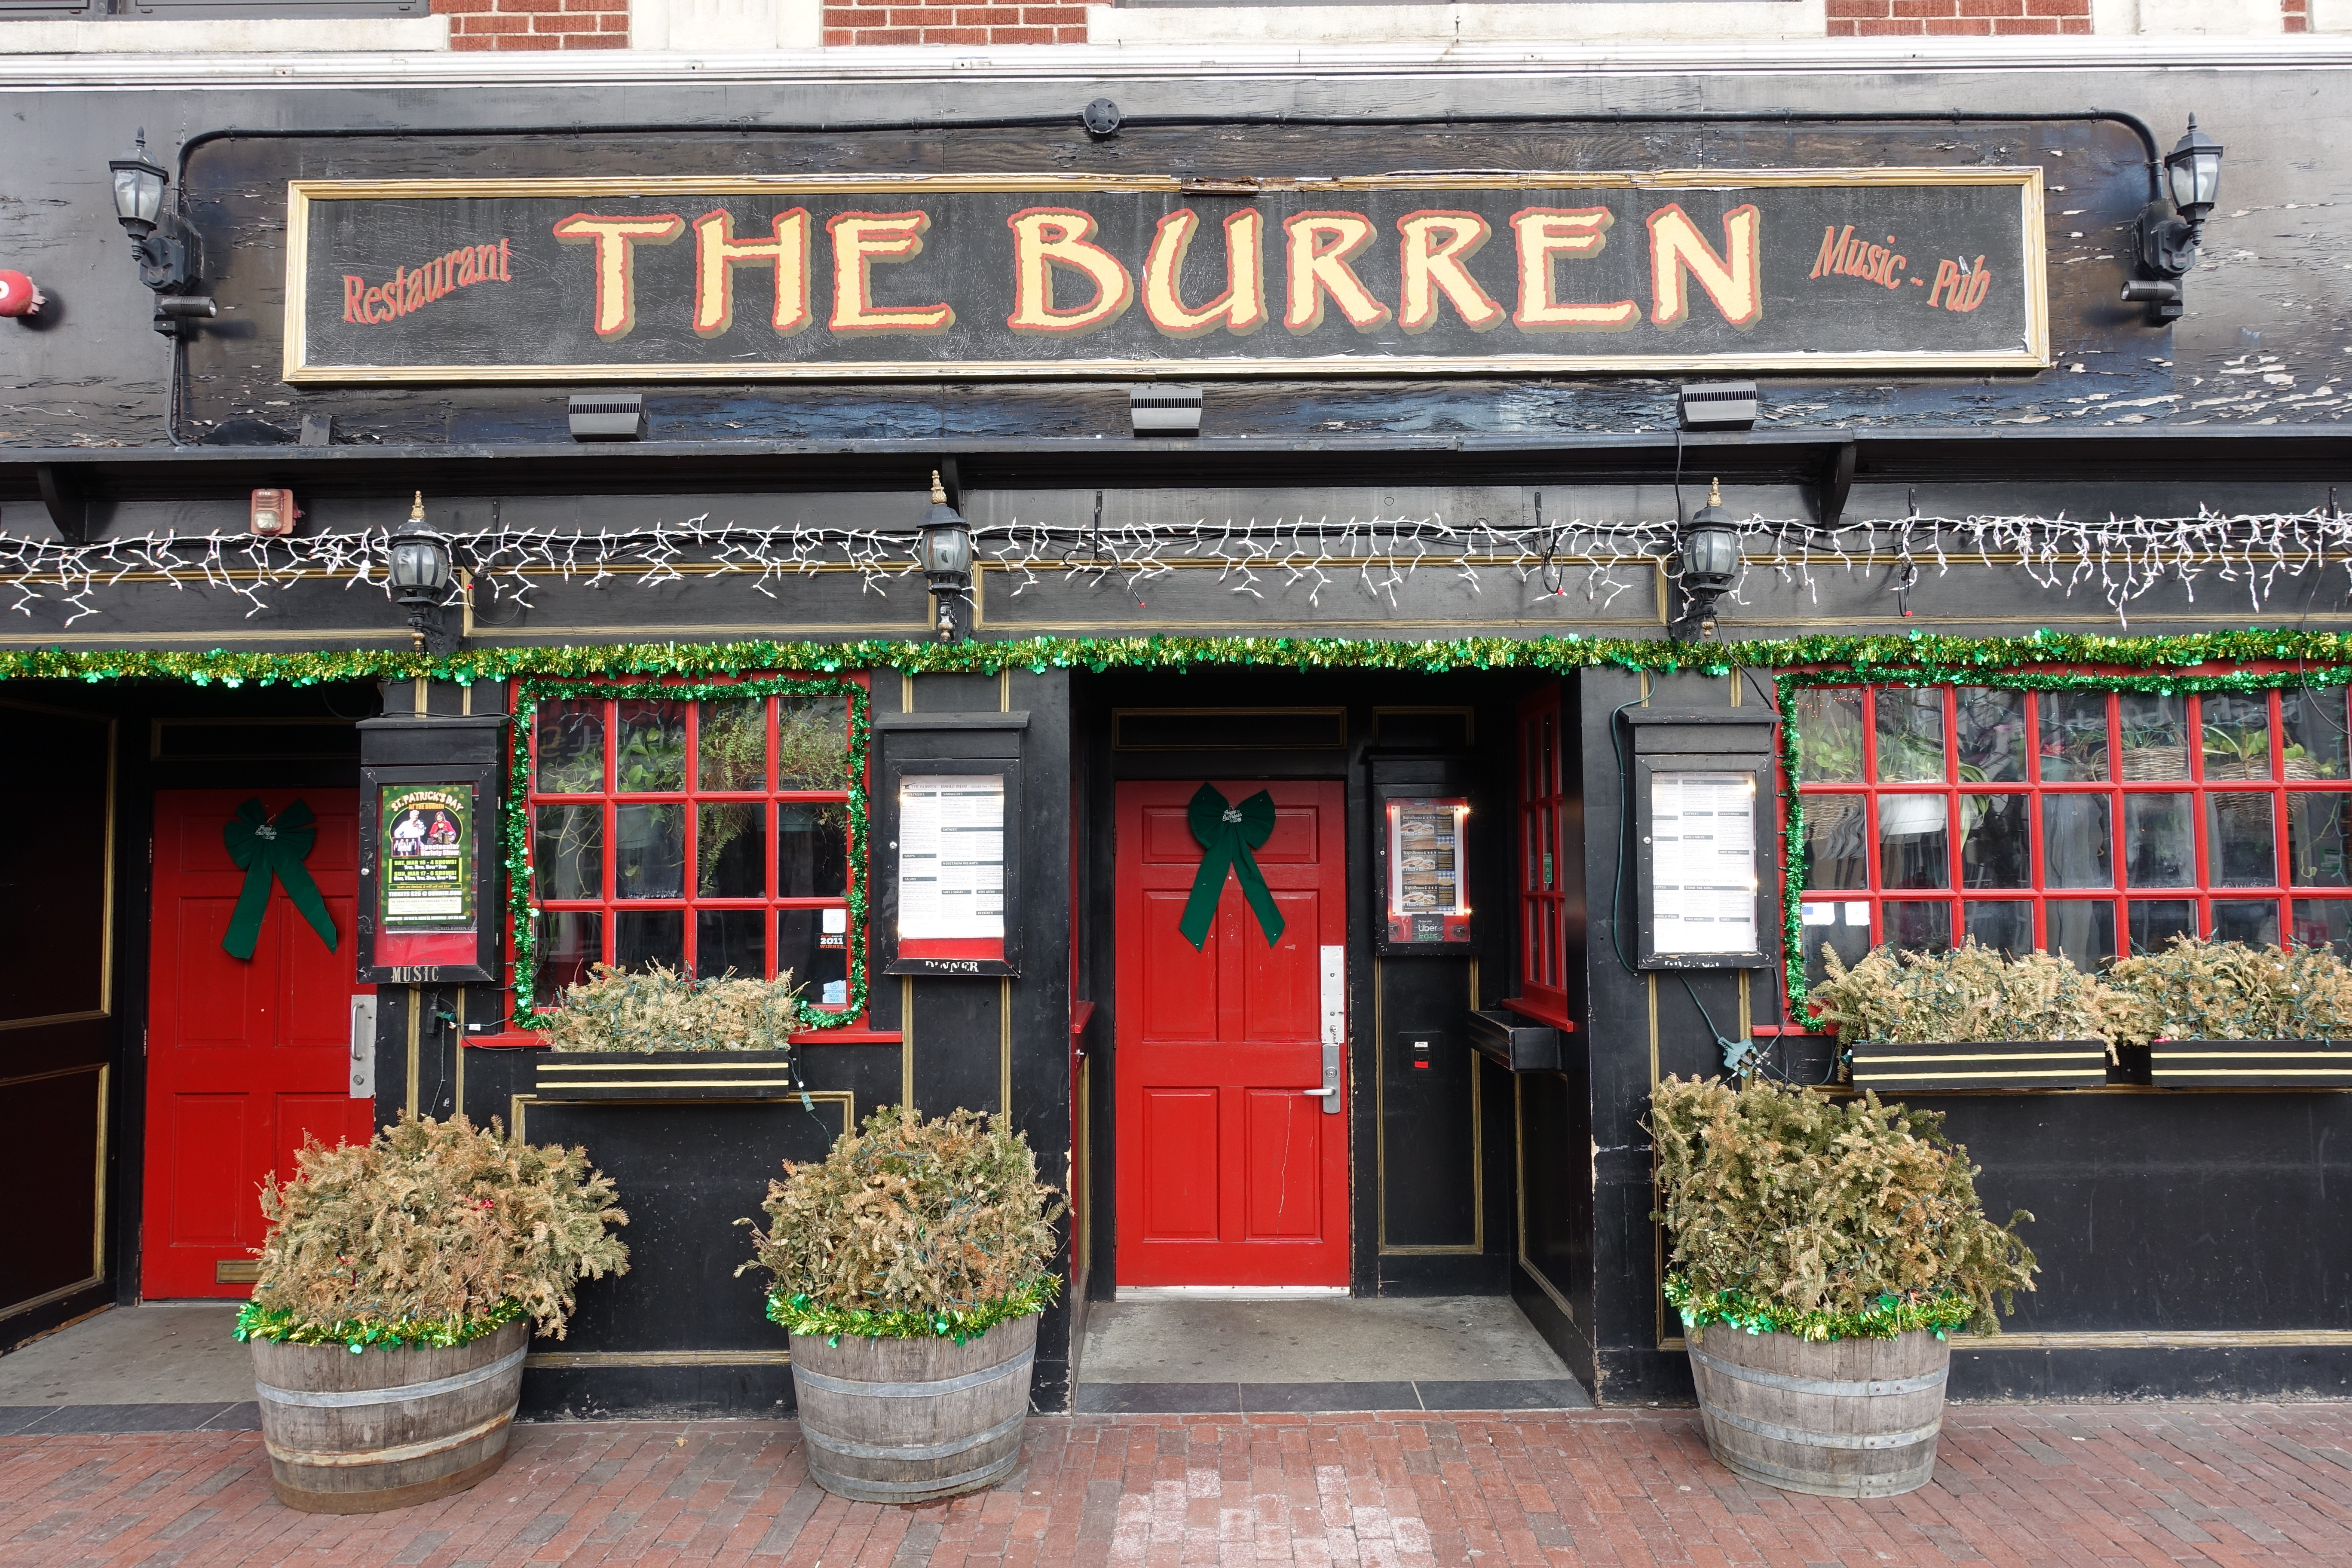 The exterior of the Burren in Somerville’s Davis Square, painted black with bright red doors and window frames